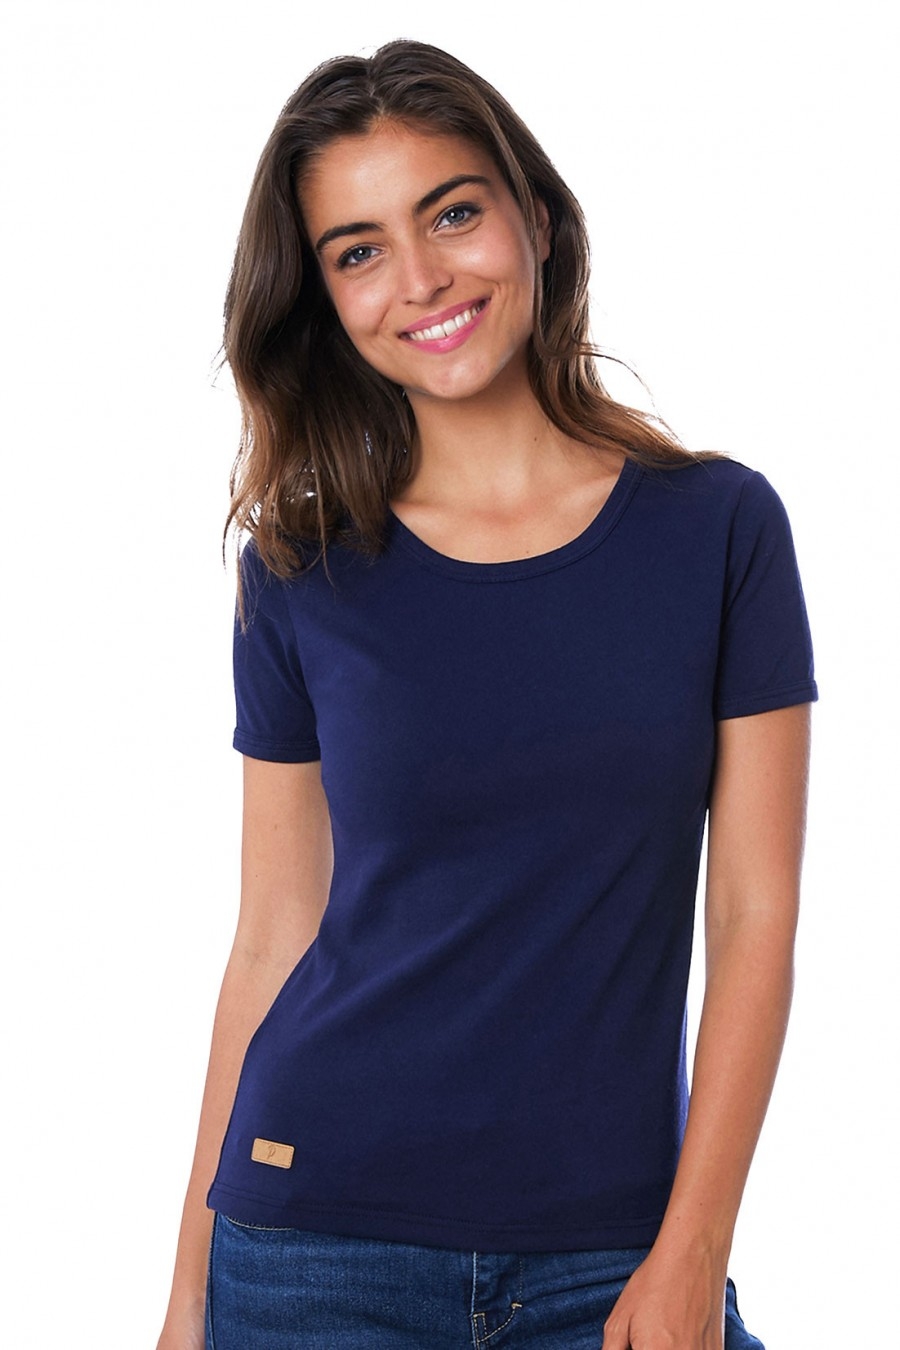 T-SHIRT FEMME MANCHE COURTE COL ROND BLEU ROI - Made in France & 100% Recyclé